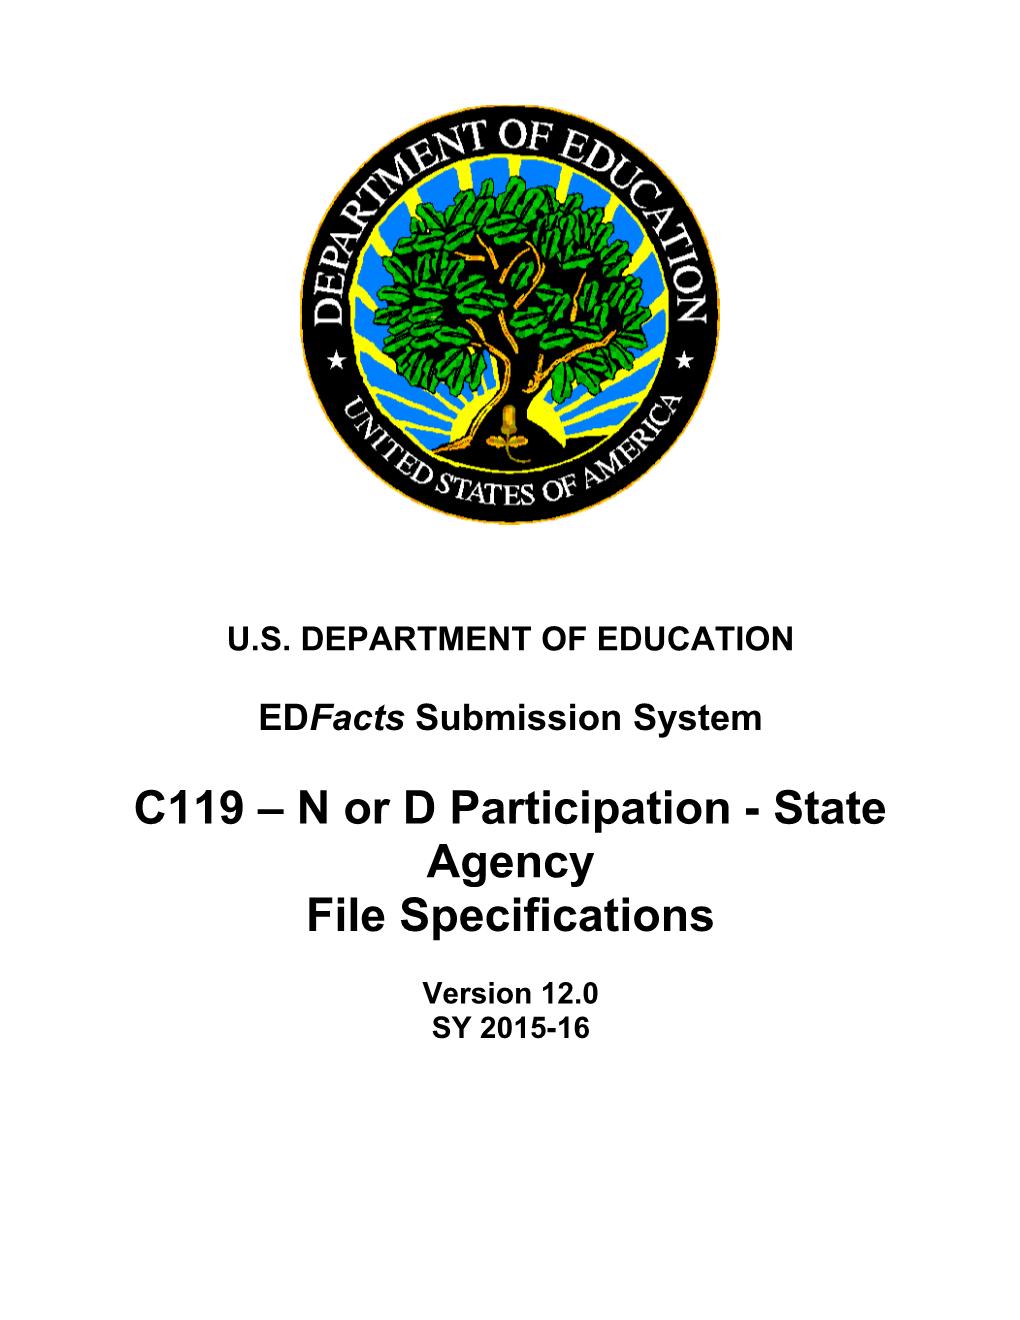 N Or D Participation - State Agency File Specifications (Msword)